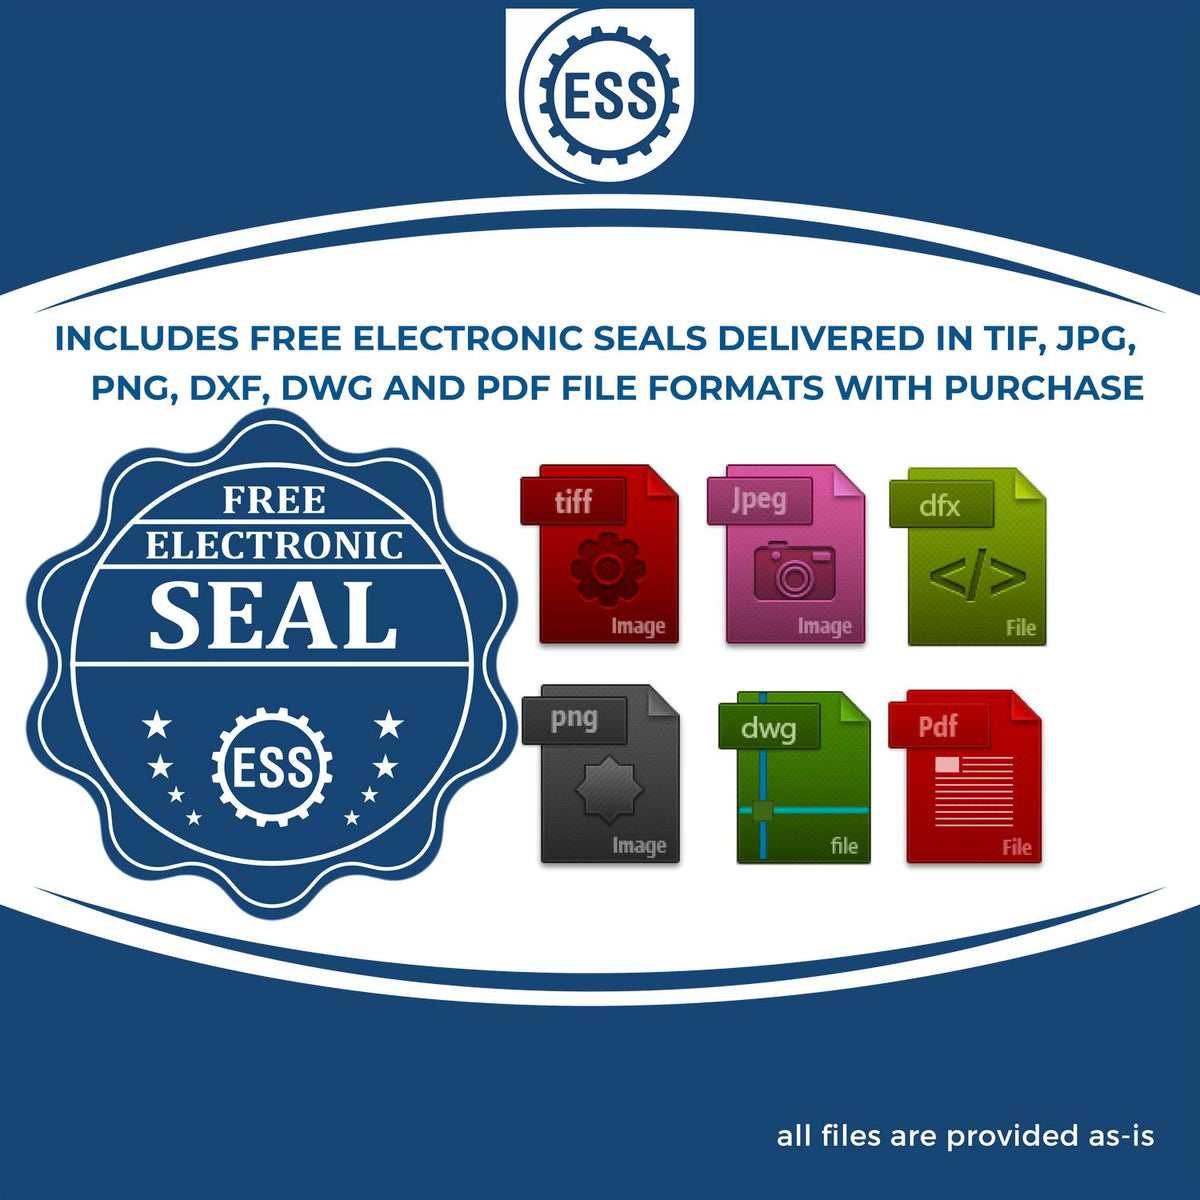 An infographic for the free electronic seal for the Heavy Duty Cast Iron Louisiana Architect Embosser illustrating the different file type icons such as DXF, DWG, TIF, JPG and PNG.